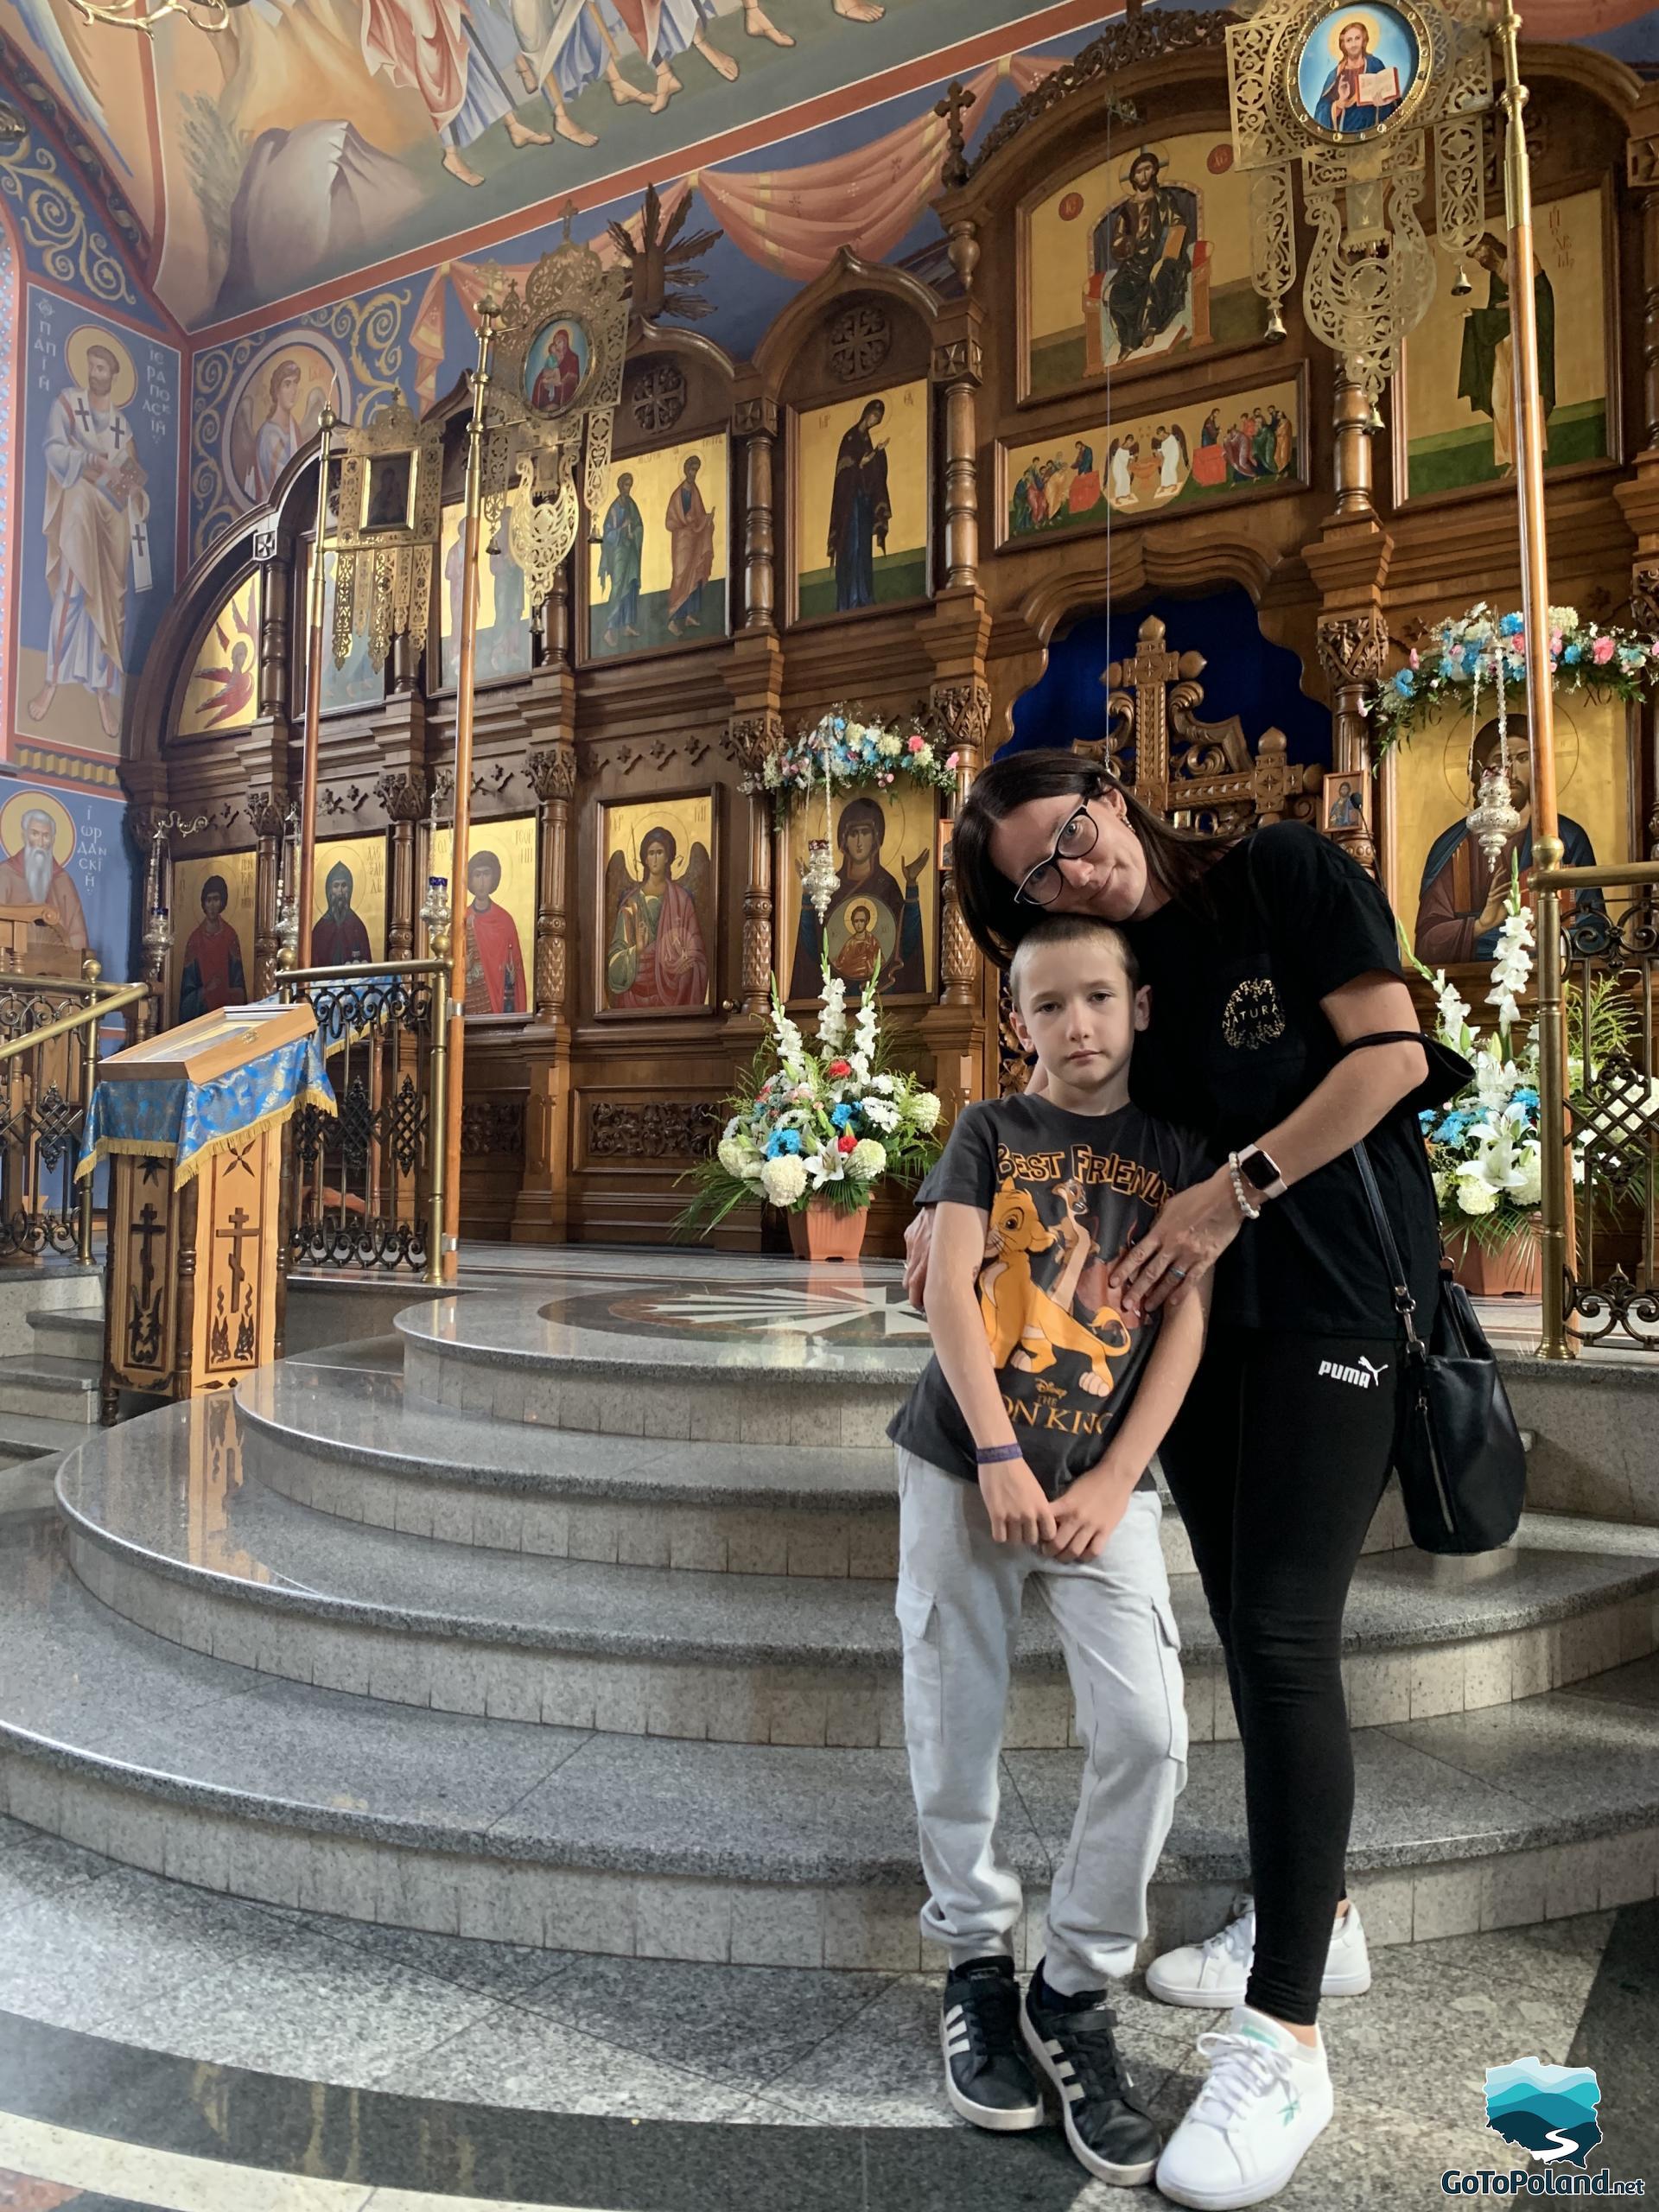 a boy and a woman are standing in front of the richly decorated iconostasis